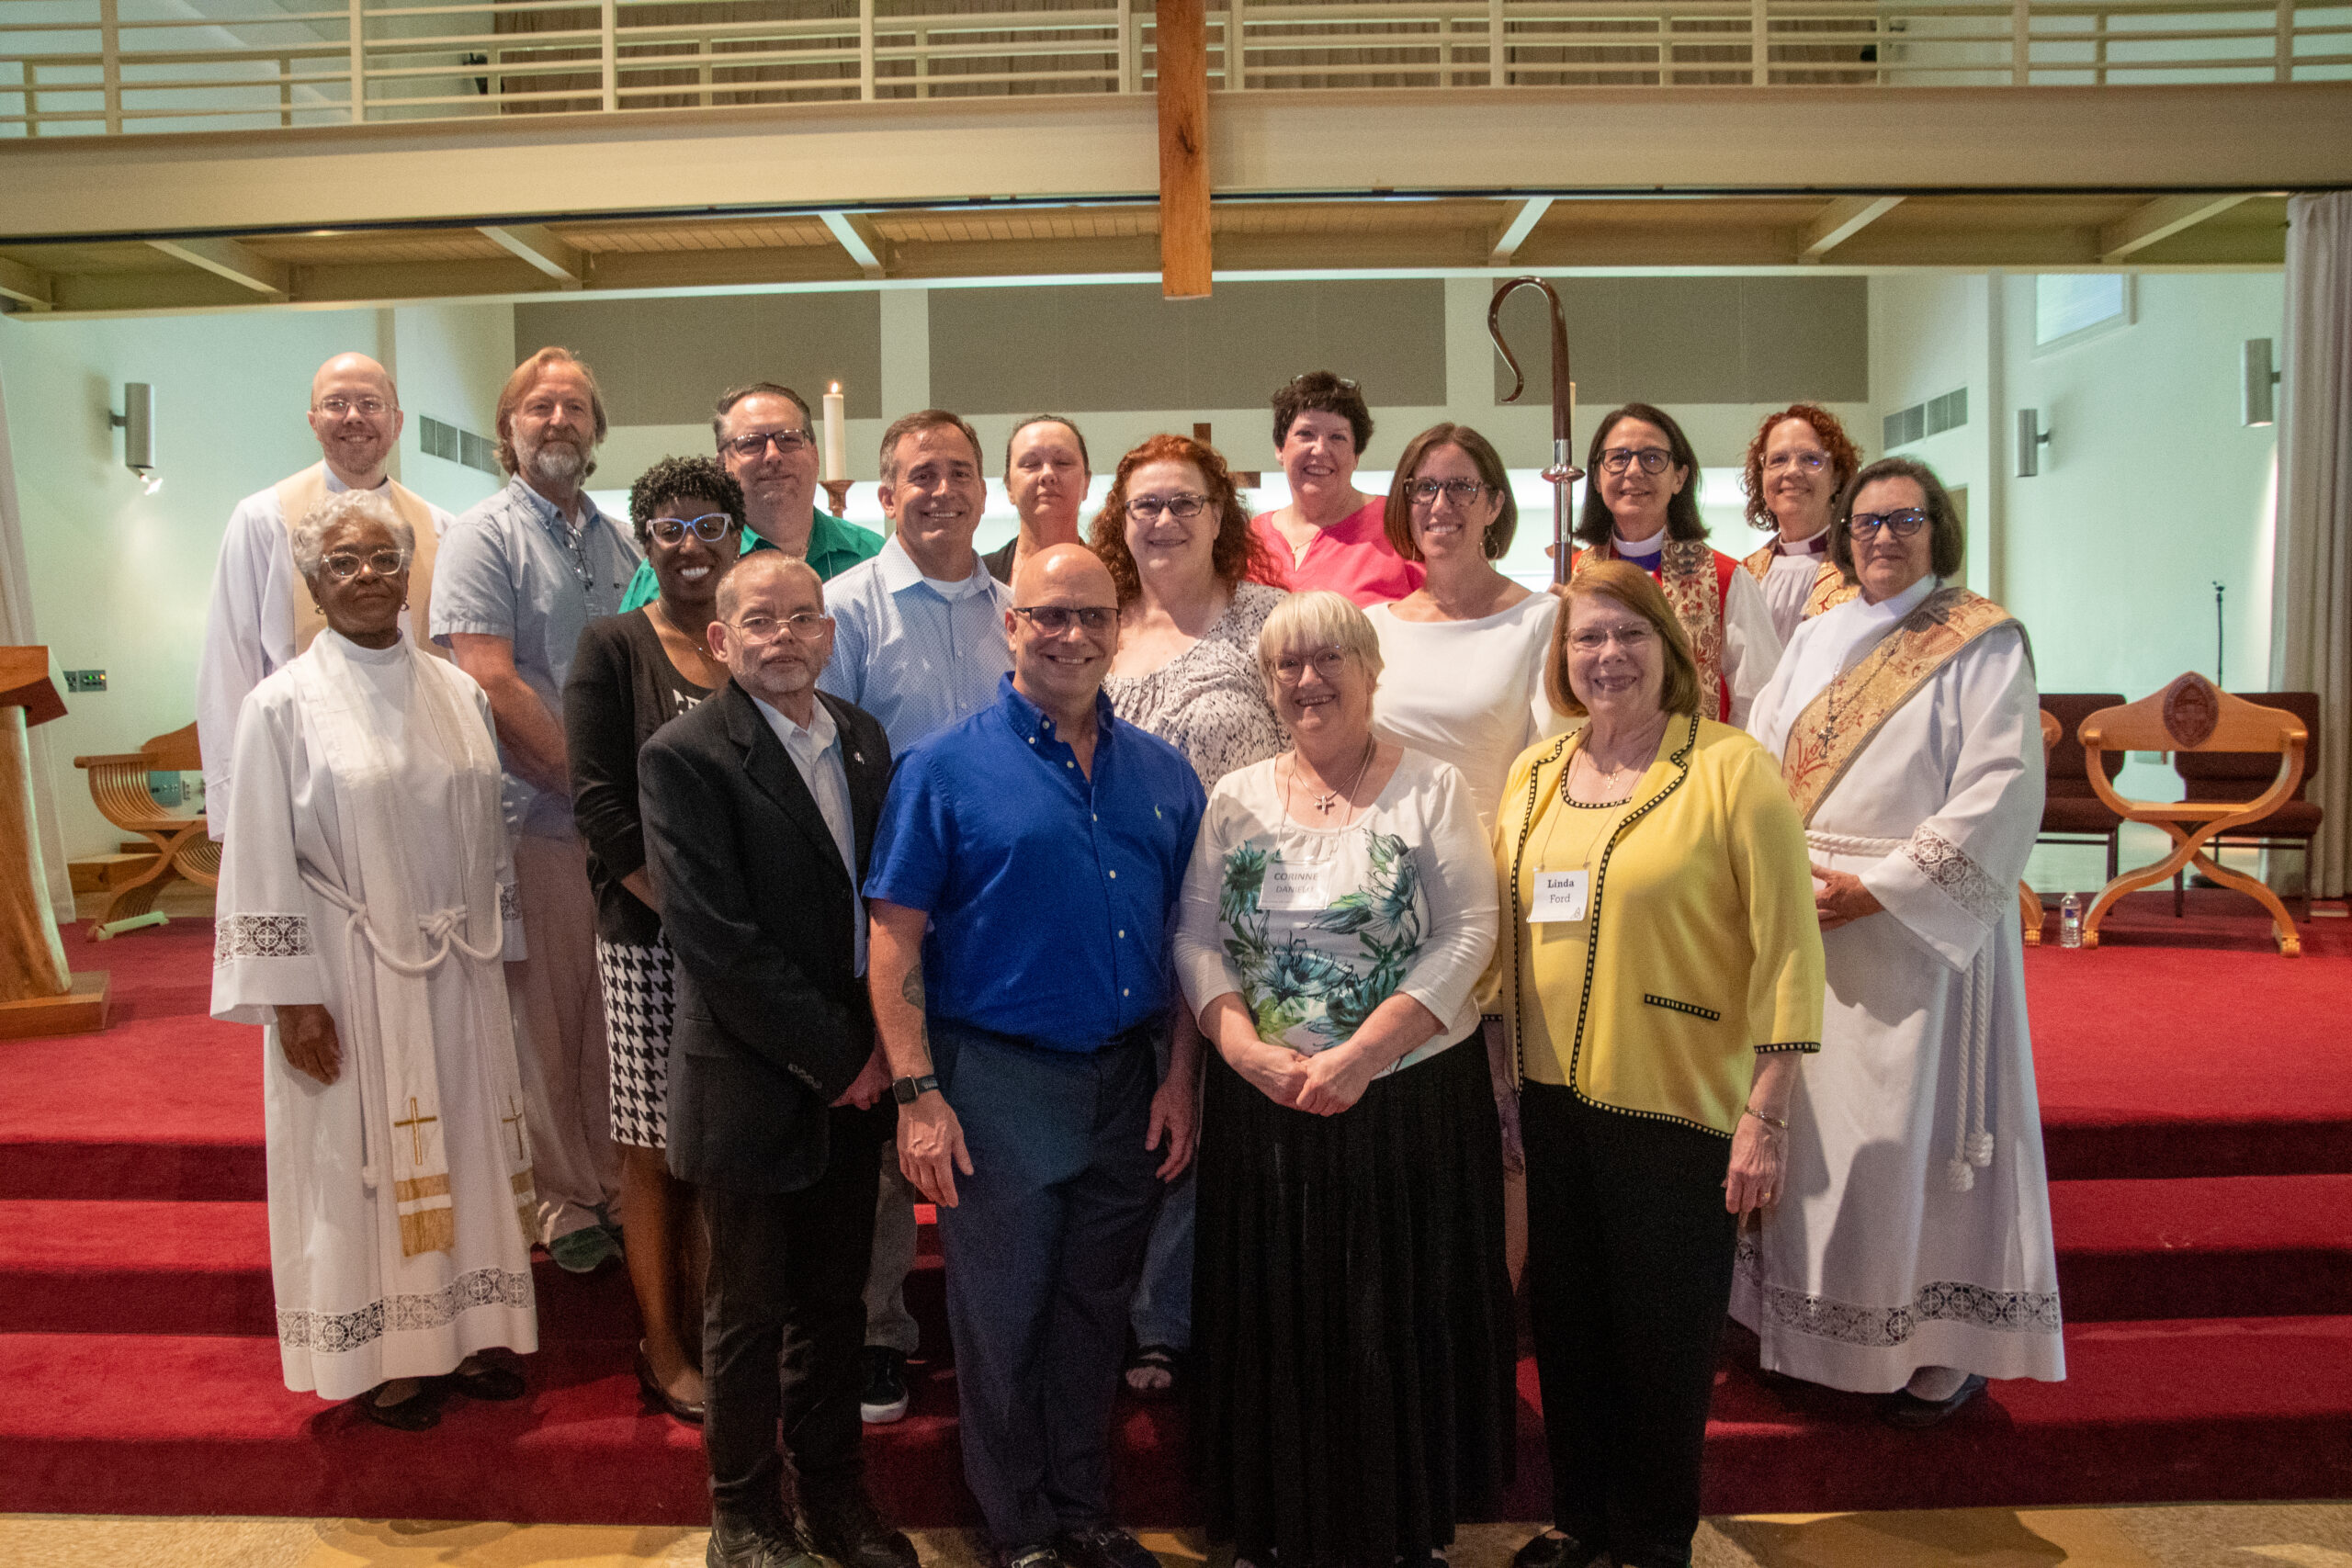 The Iona School for Ministry held its graduation last weekend at Camp Allen.